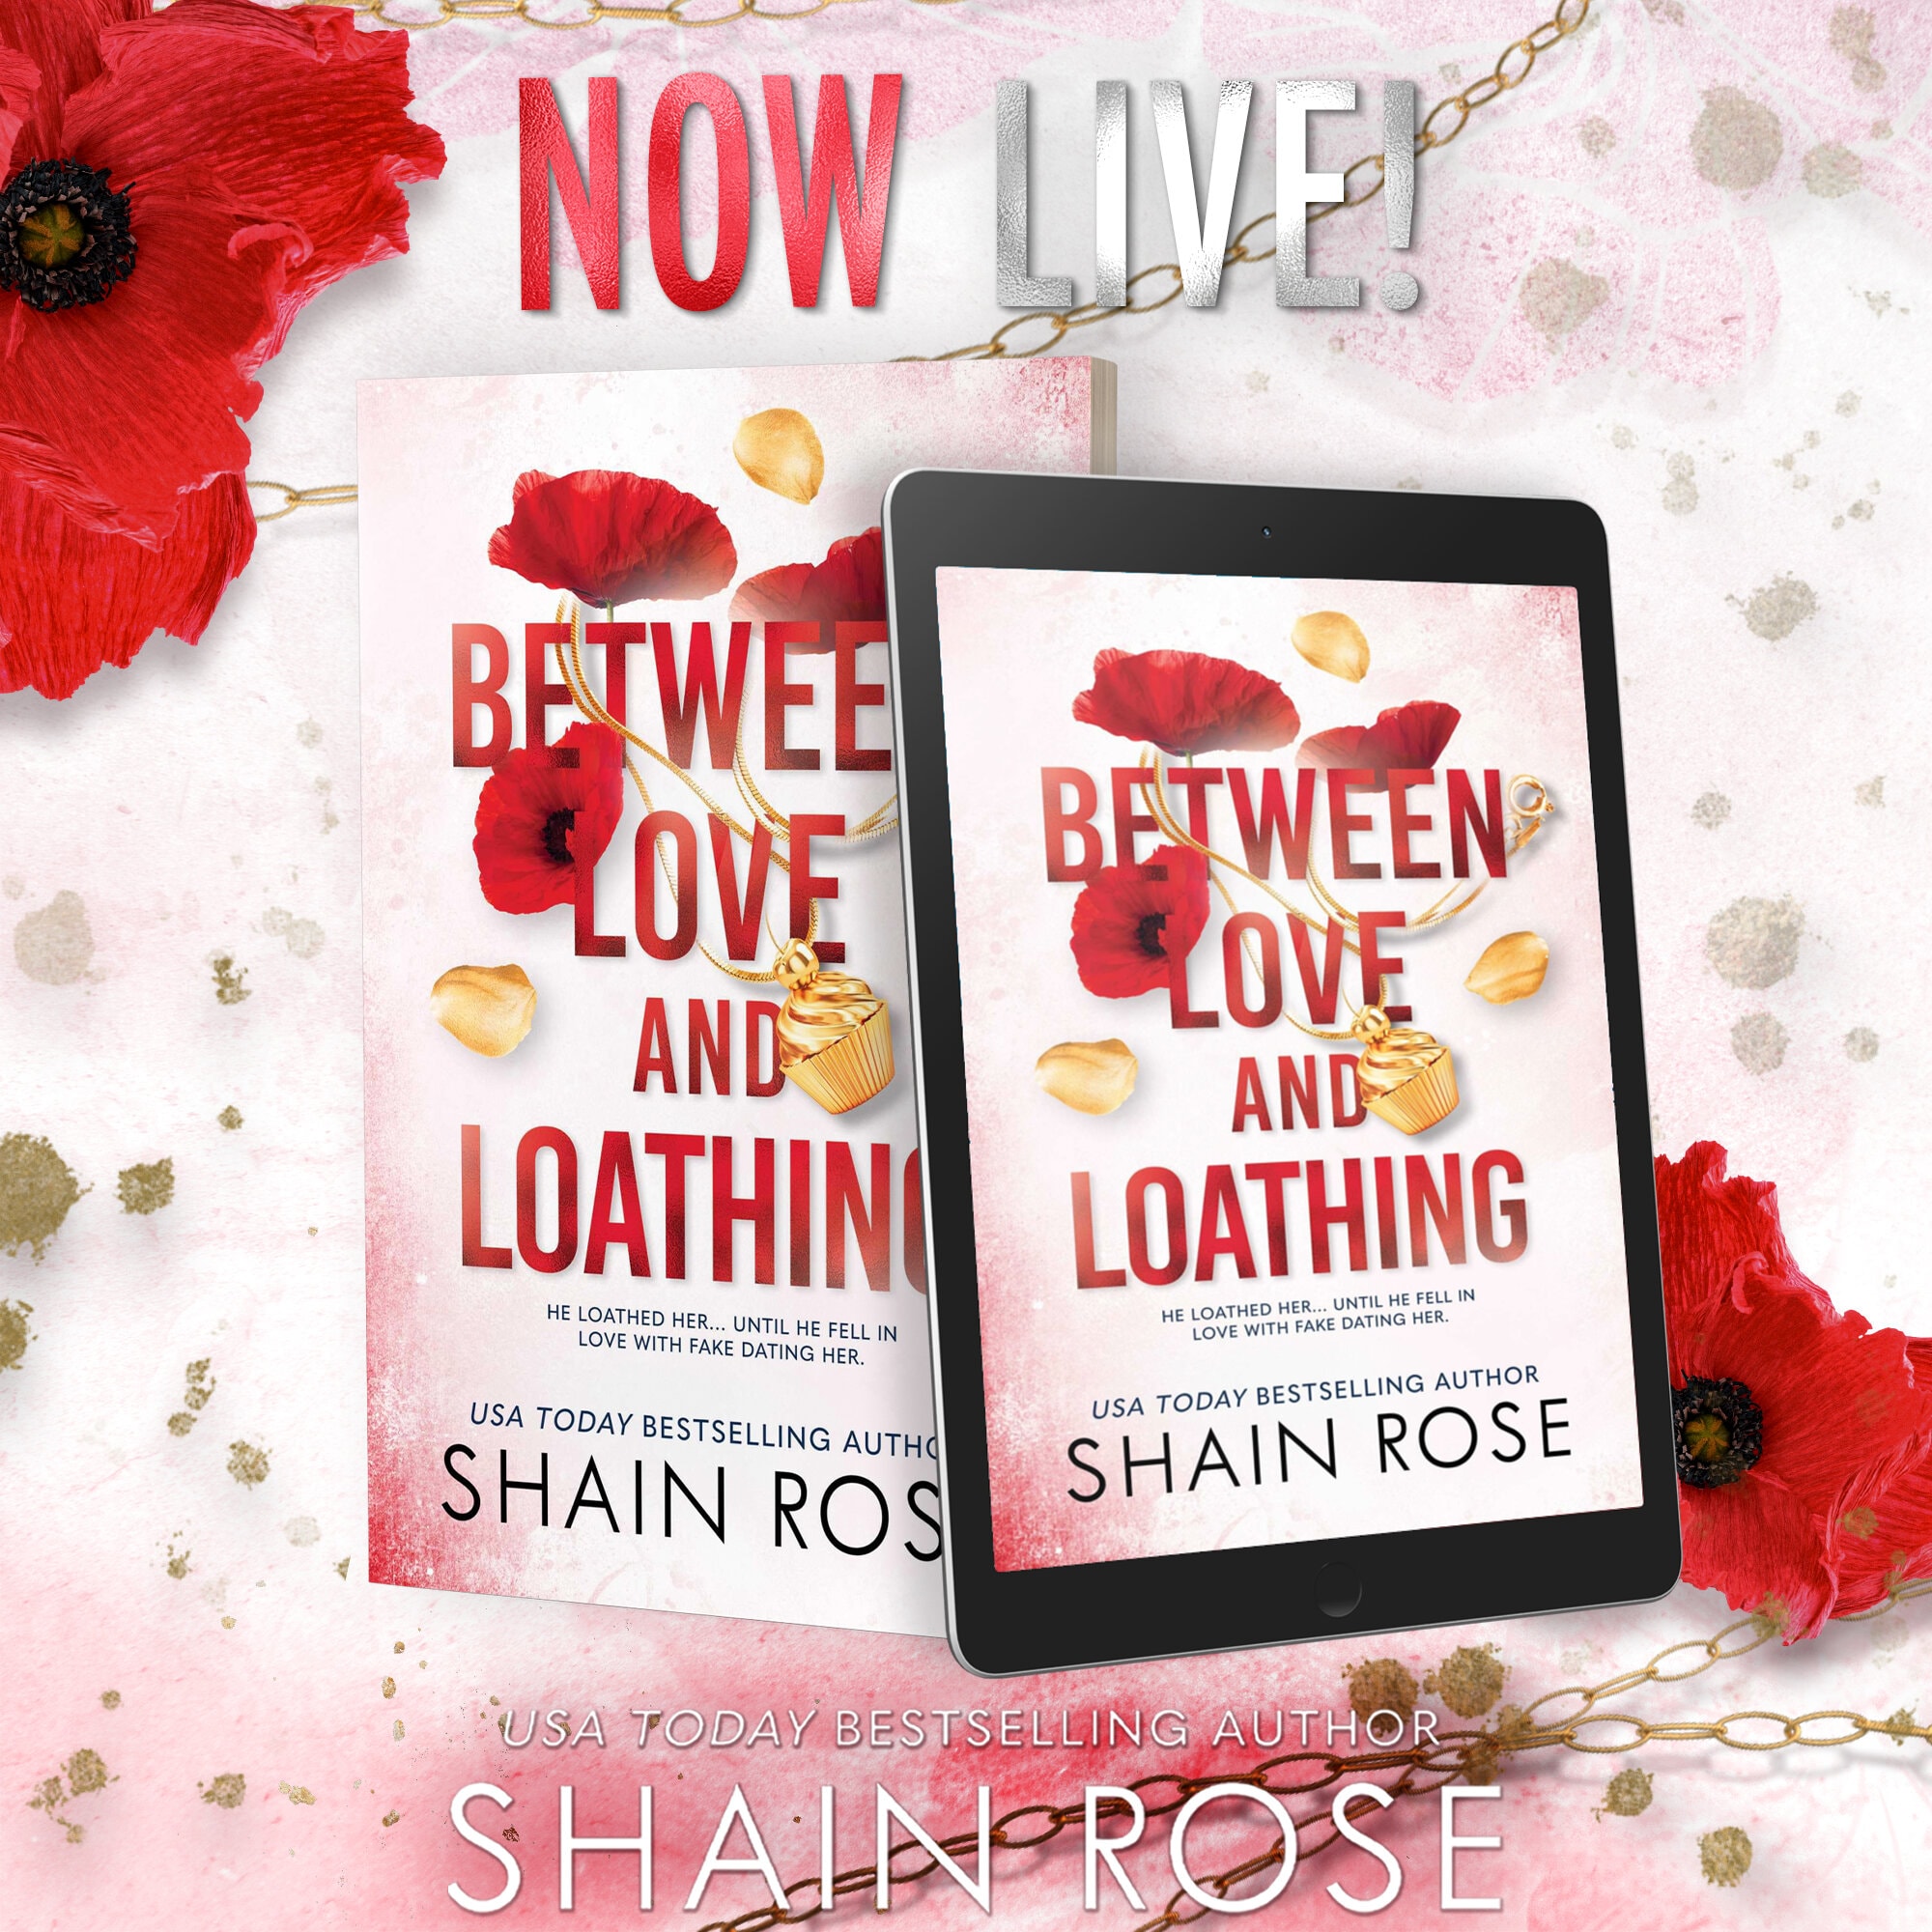 Between Love and Loathing by Shain Rose Book Review - Zaji-Kali Makes